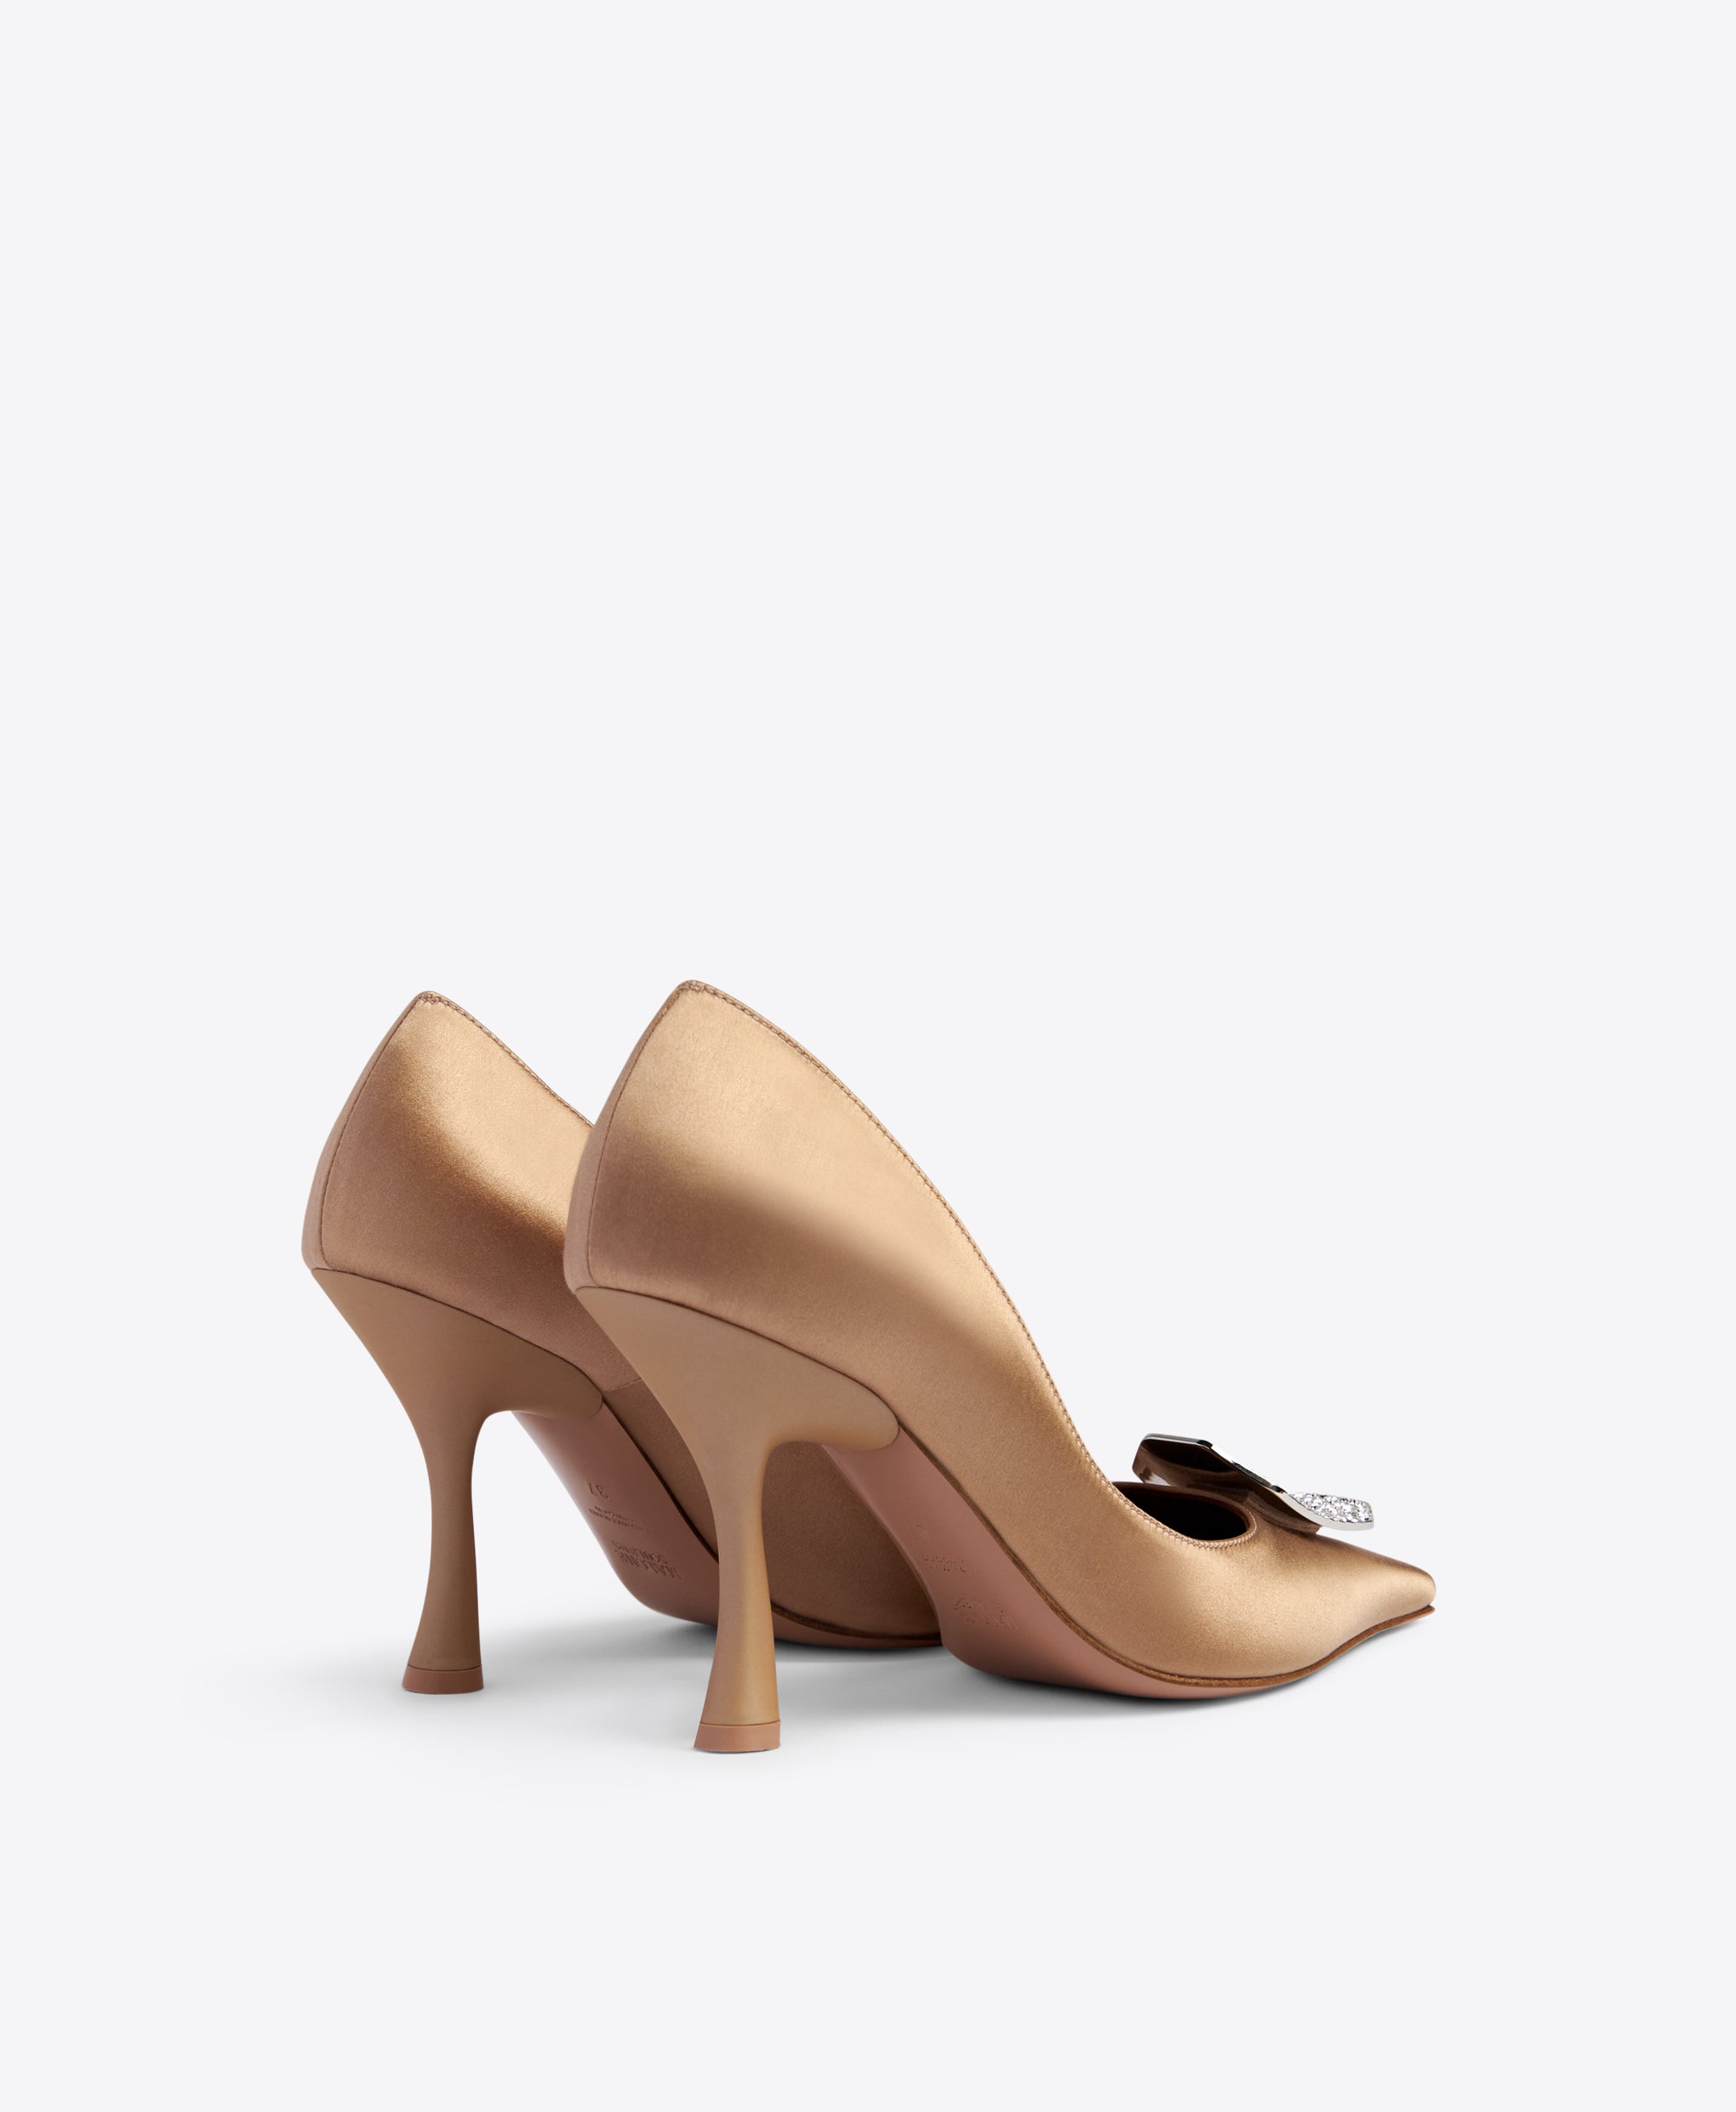 Malone Souliers Vonn 90mm Sepia Satin Heeled Pumps